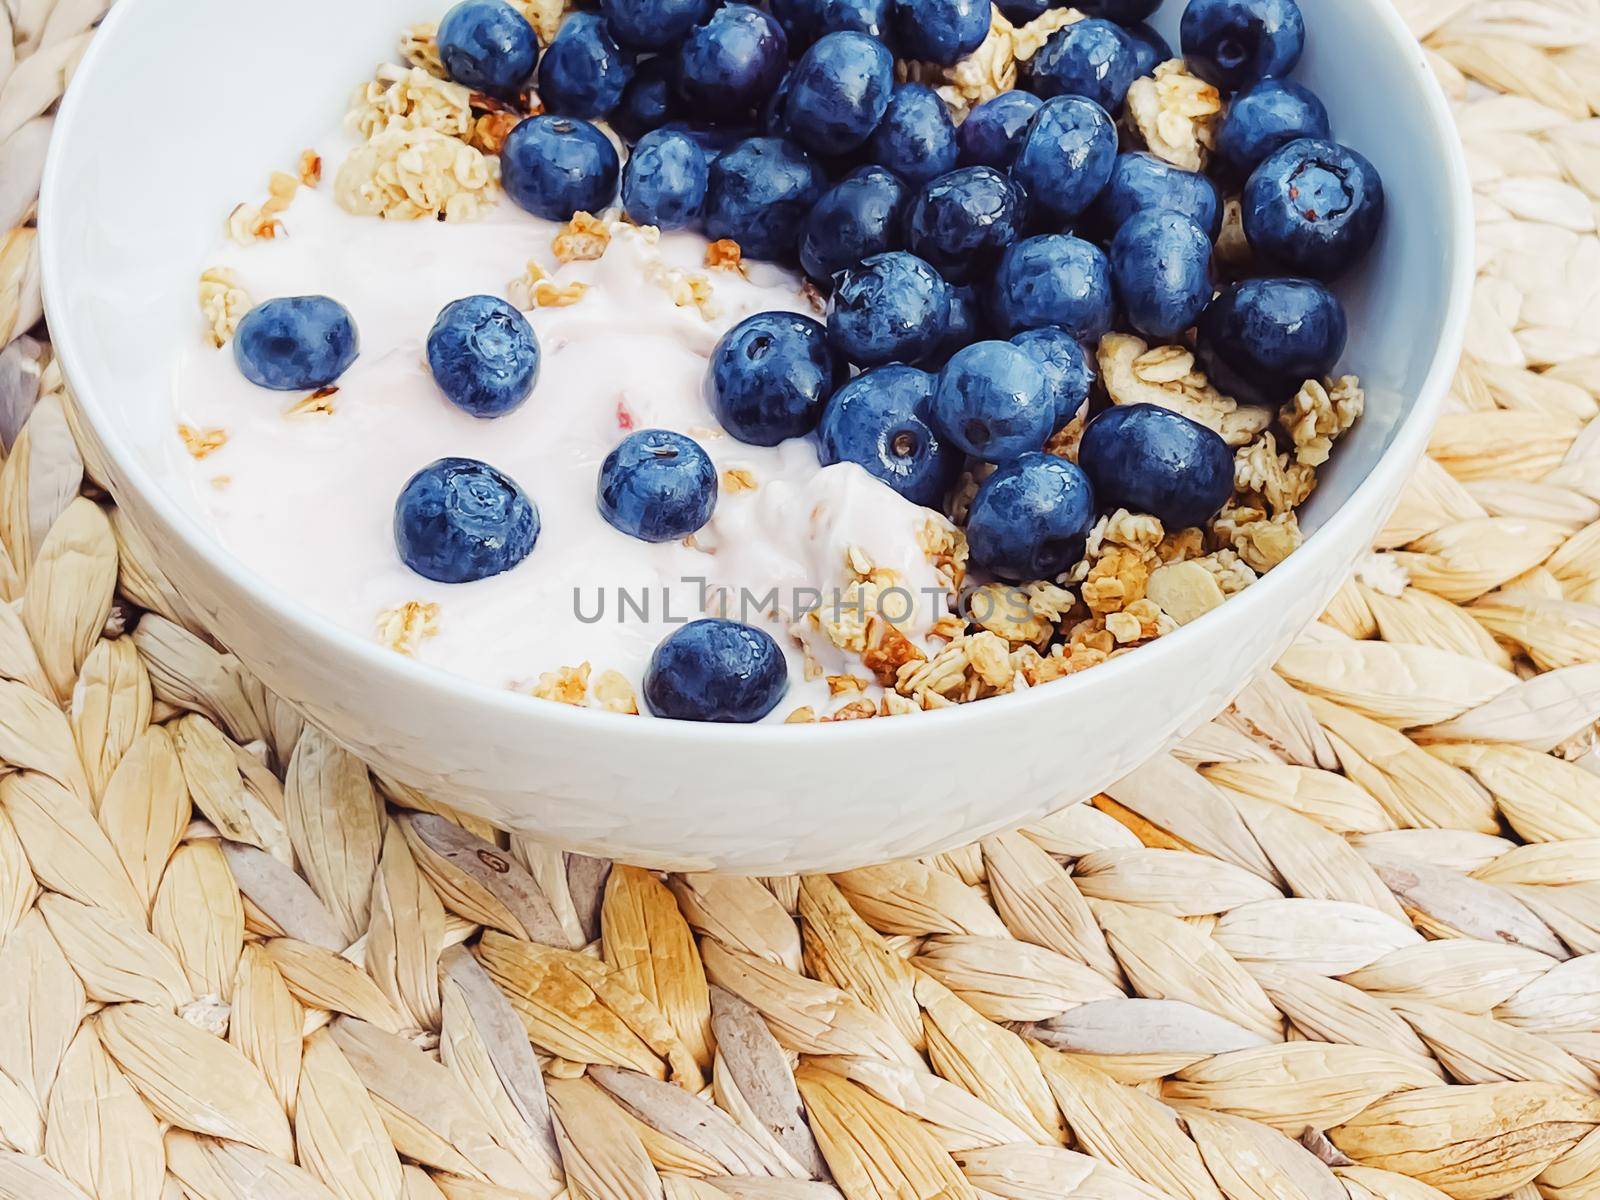 Blueberry yogurt cereal bowl as healthy breakfast and morning meal, sweet food and organic berry fruit, diet and nutrition concept